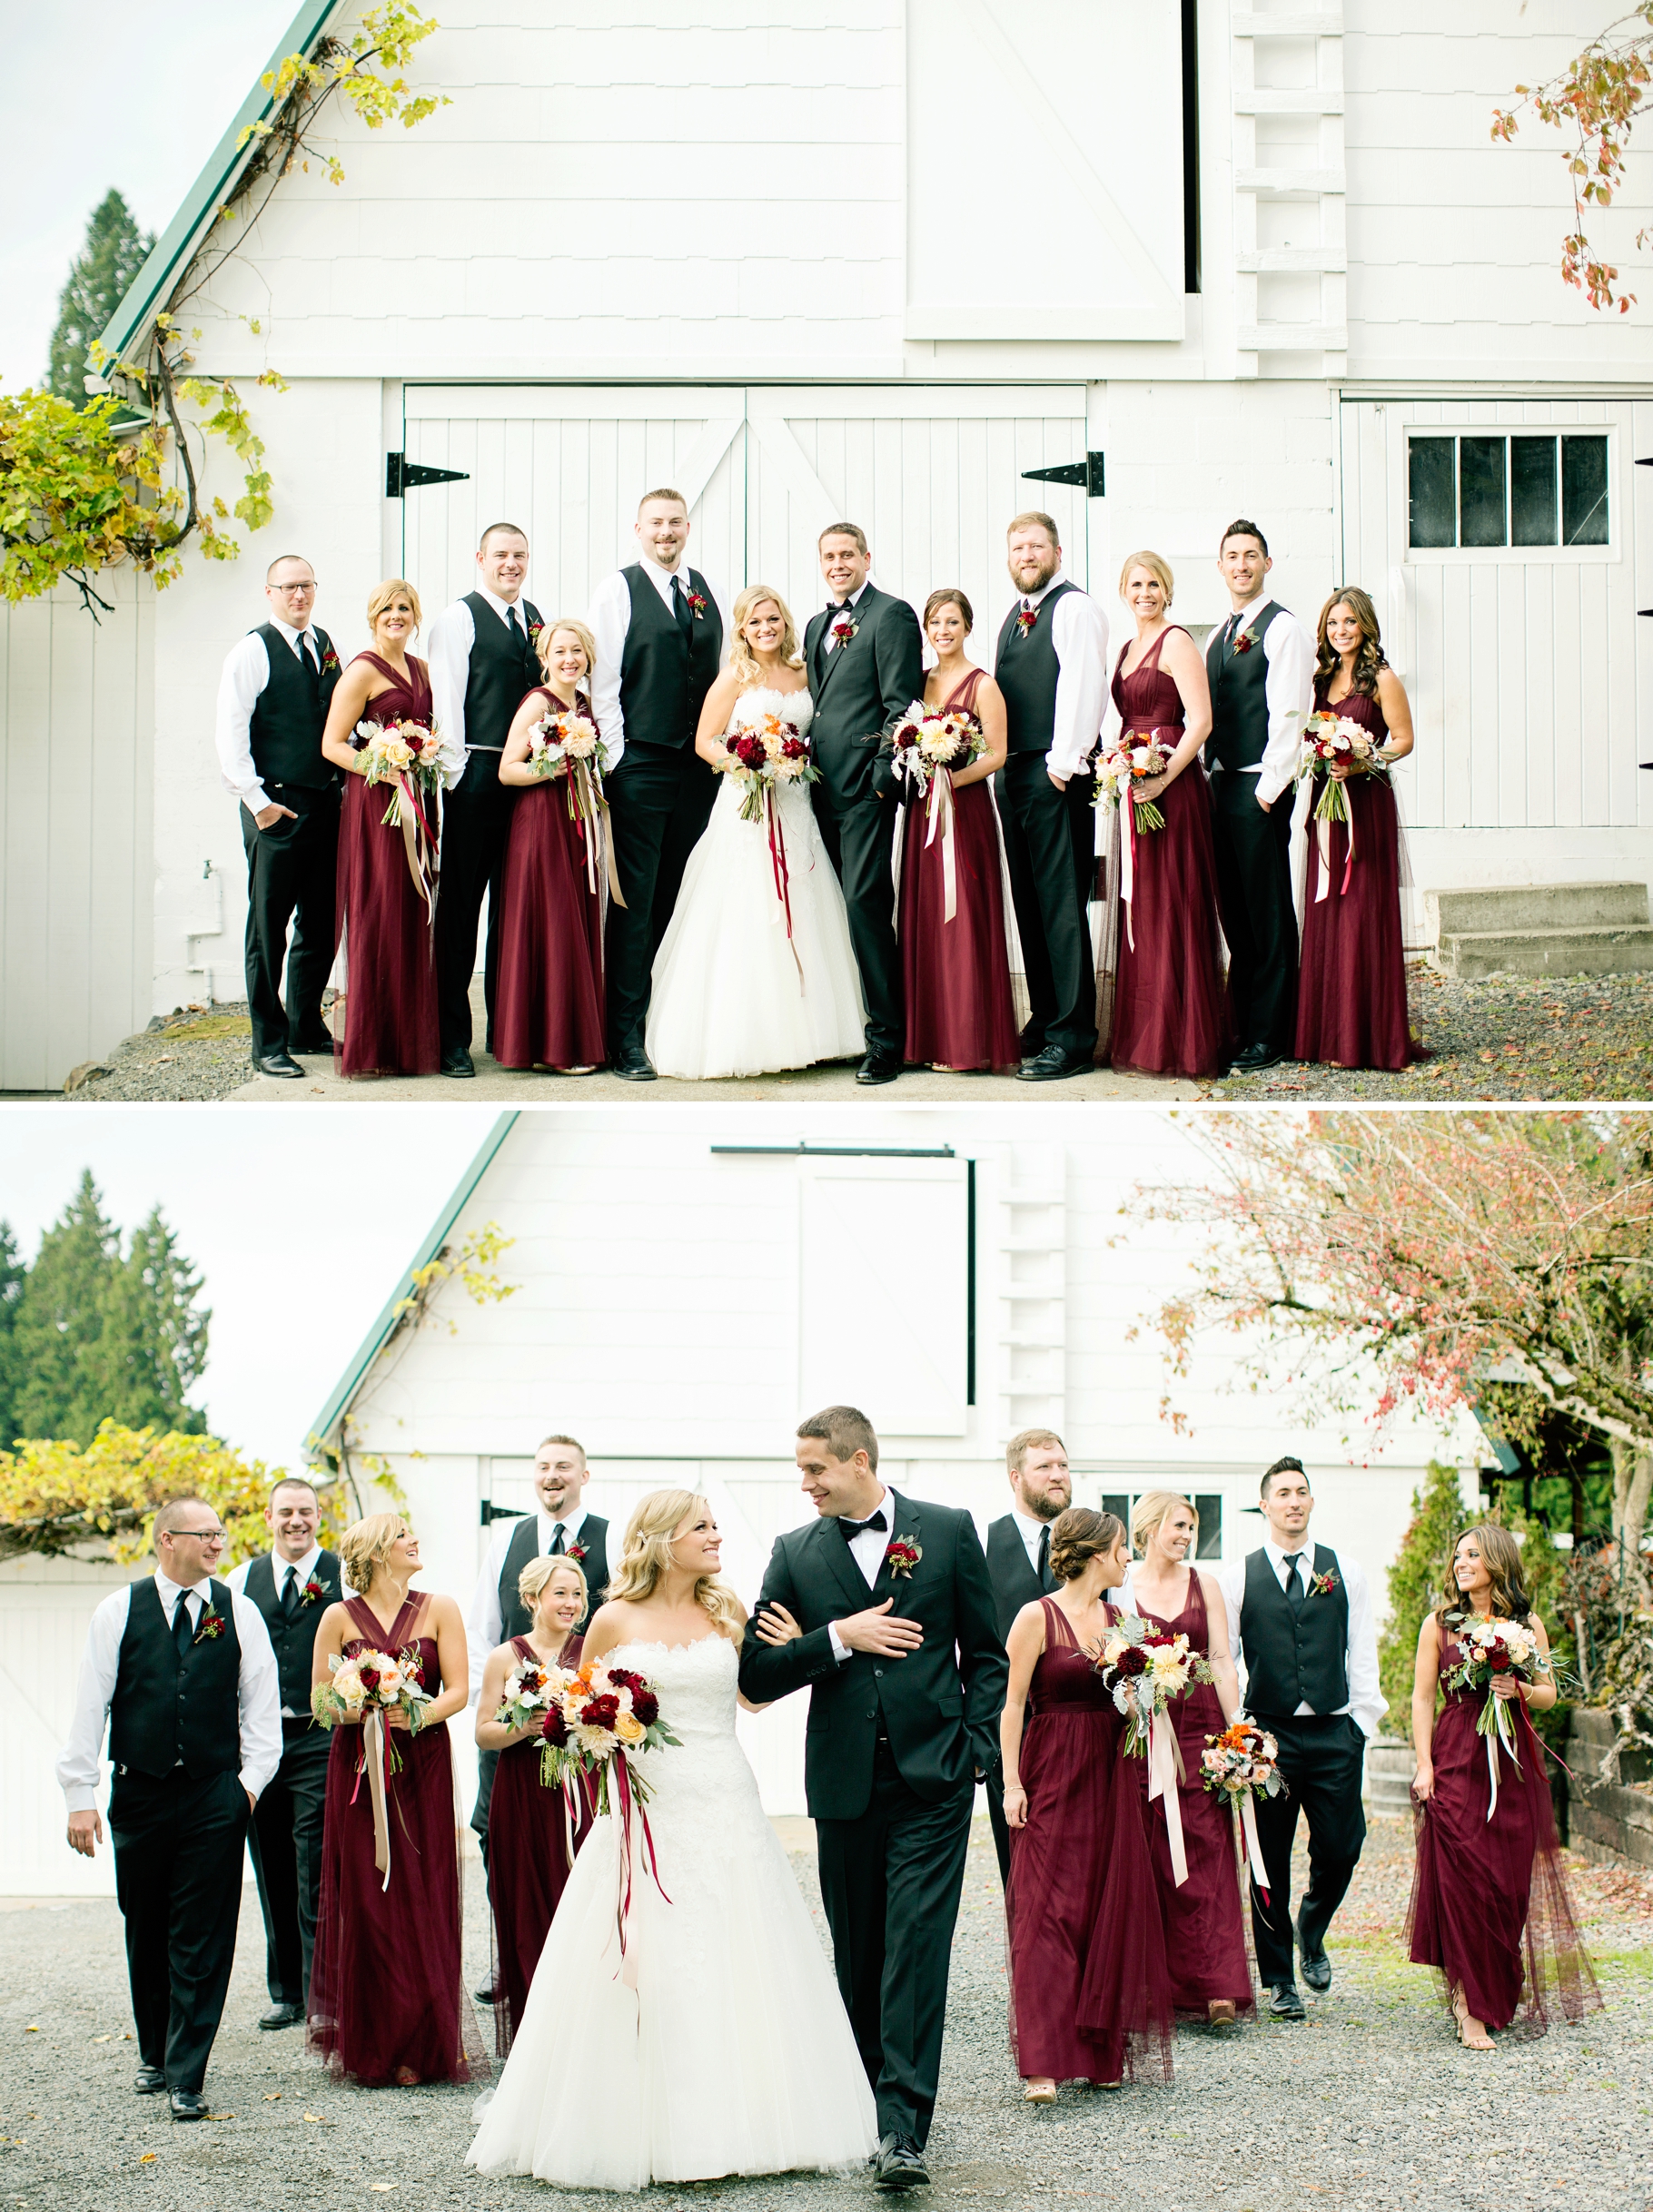 22-Wedding-Party-Portraits-Barn-Delille-Cellars-Chateau-Vineyard-Woodinville-Wedding-Photographer-Photography-by-Betty-Elaine